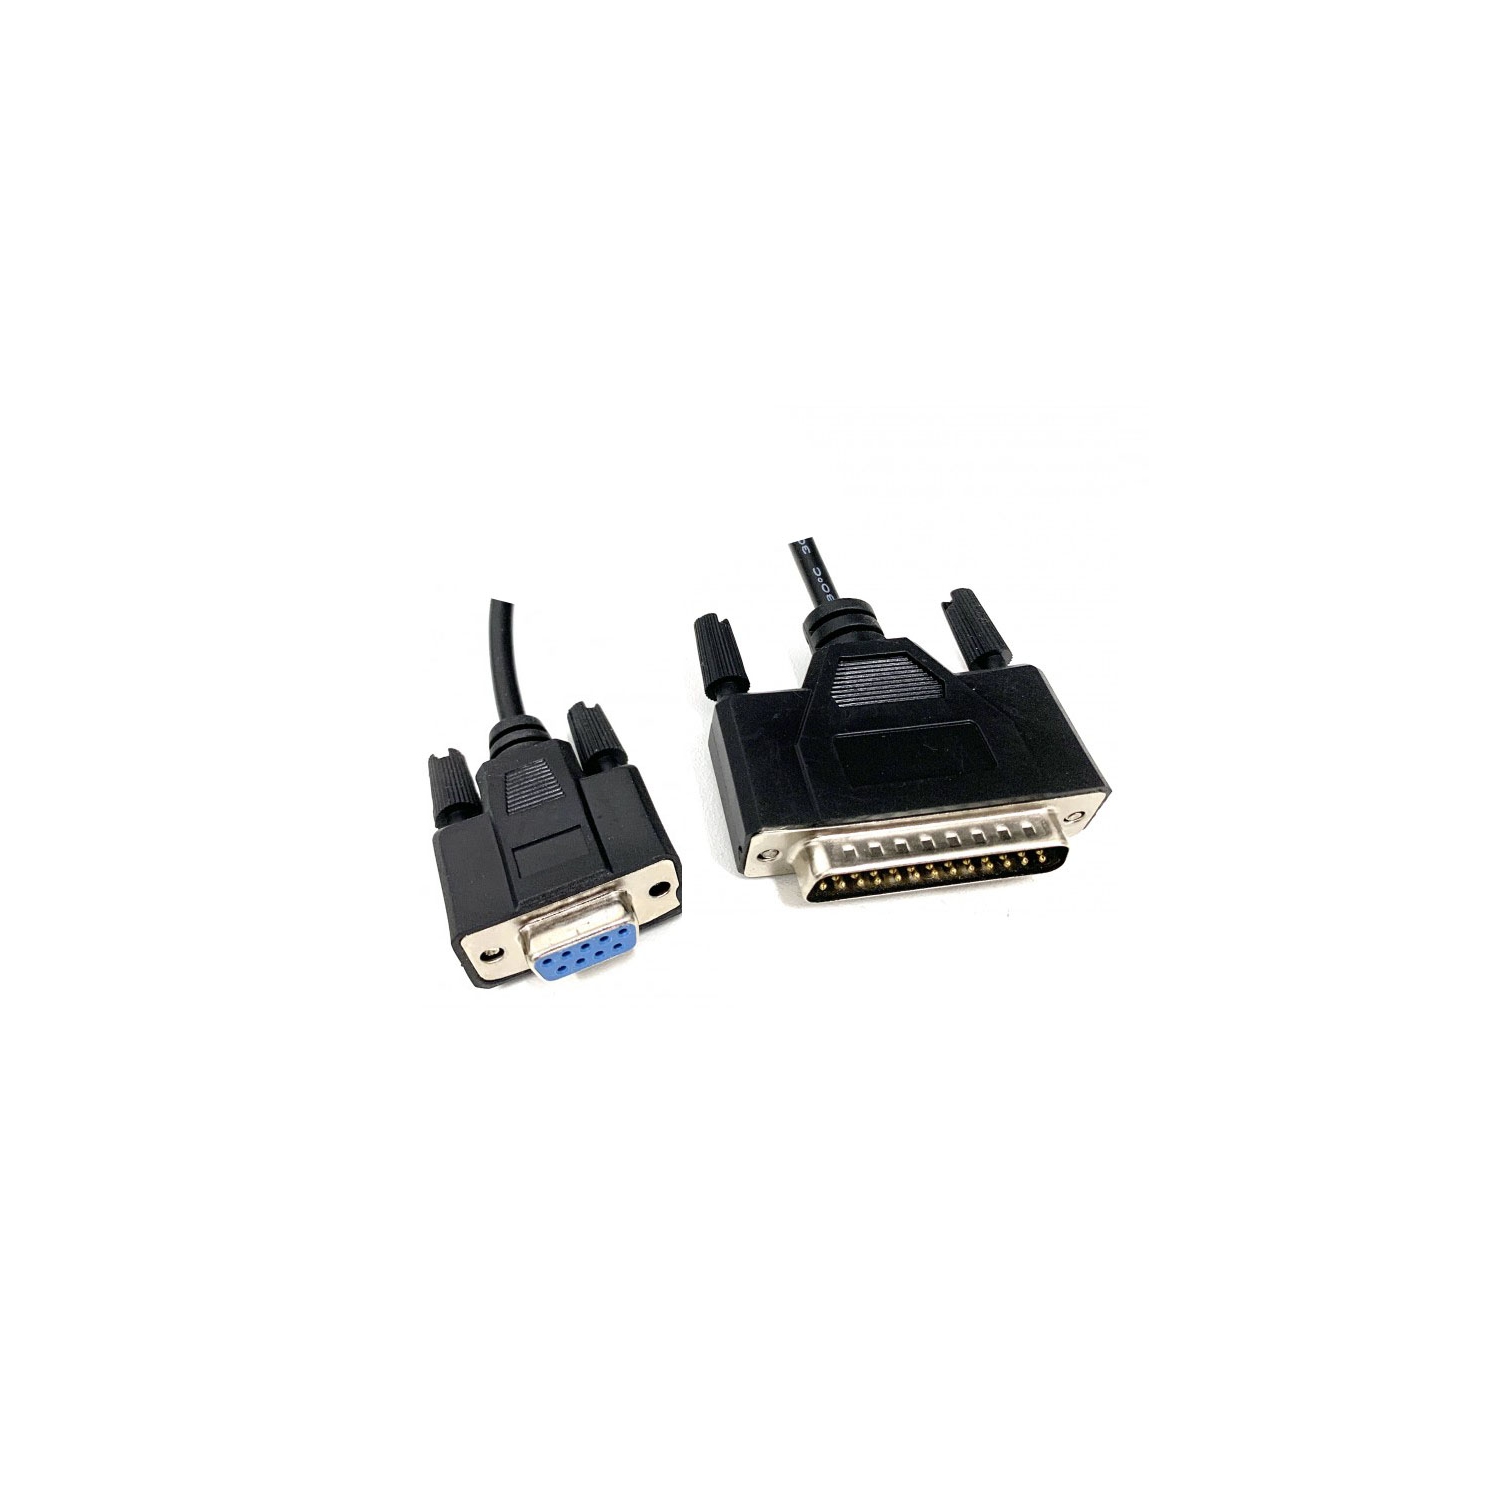 Free Shipping! HYFAI DB9 Female to DB25 Male Null-Modem Serial Port Com RS232 Cable Cord - 15 ft